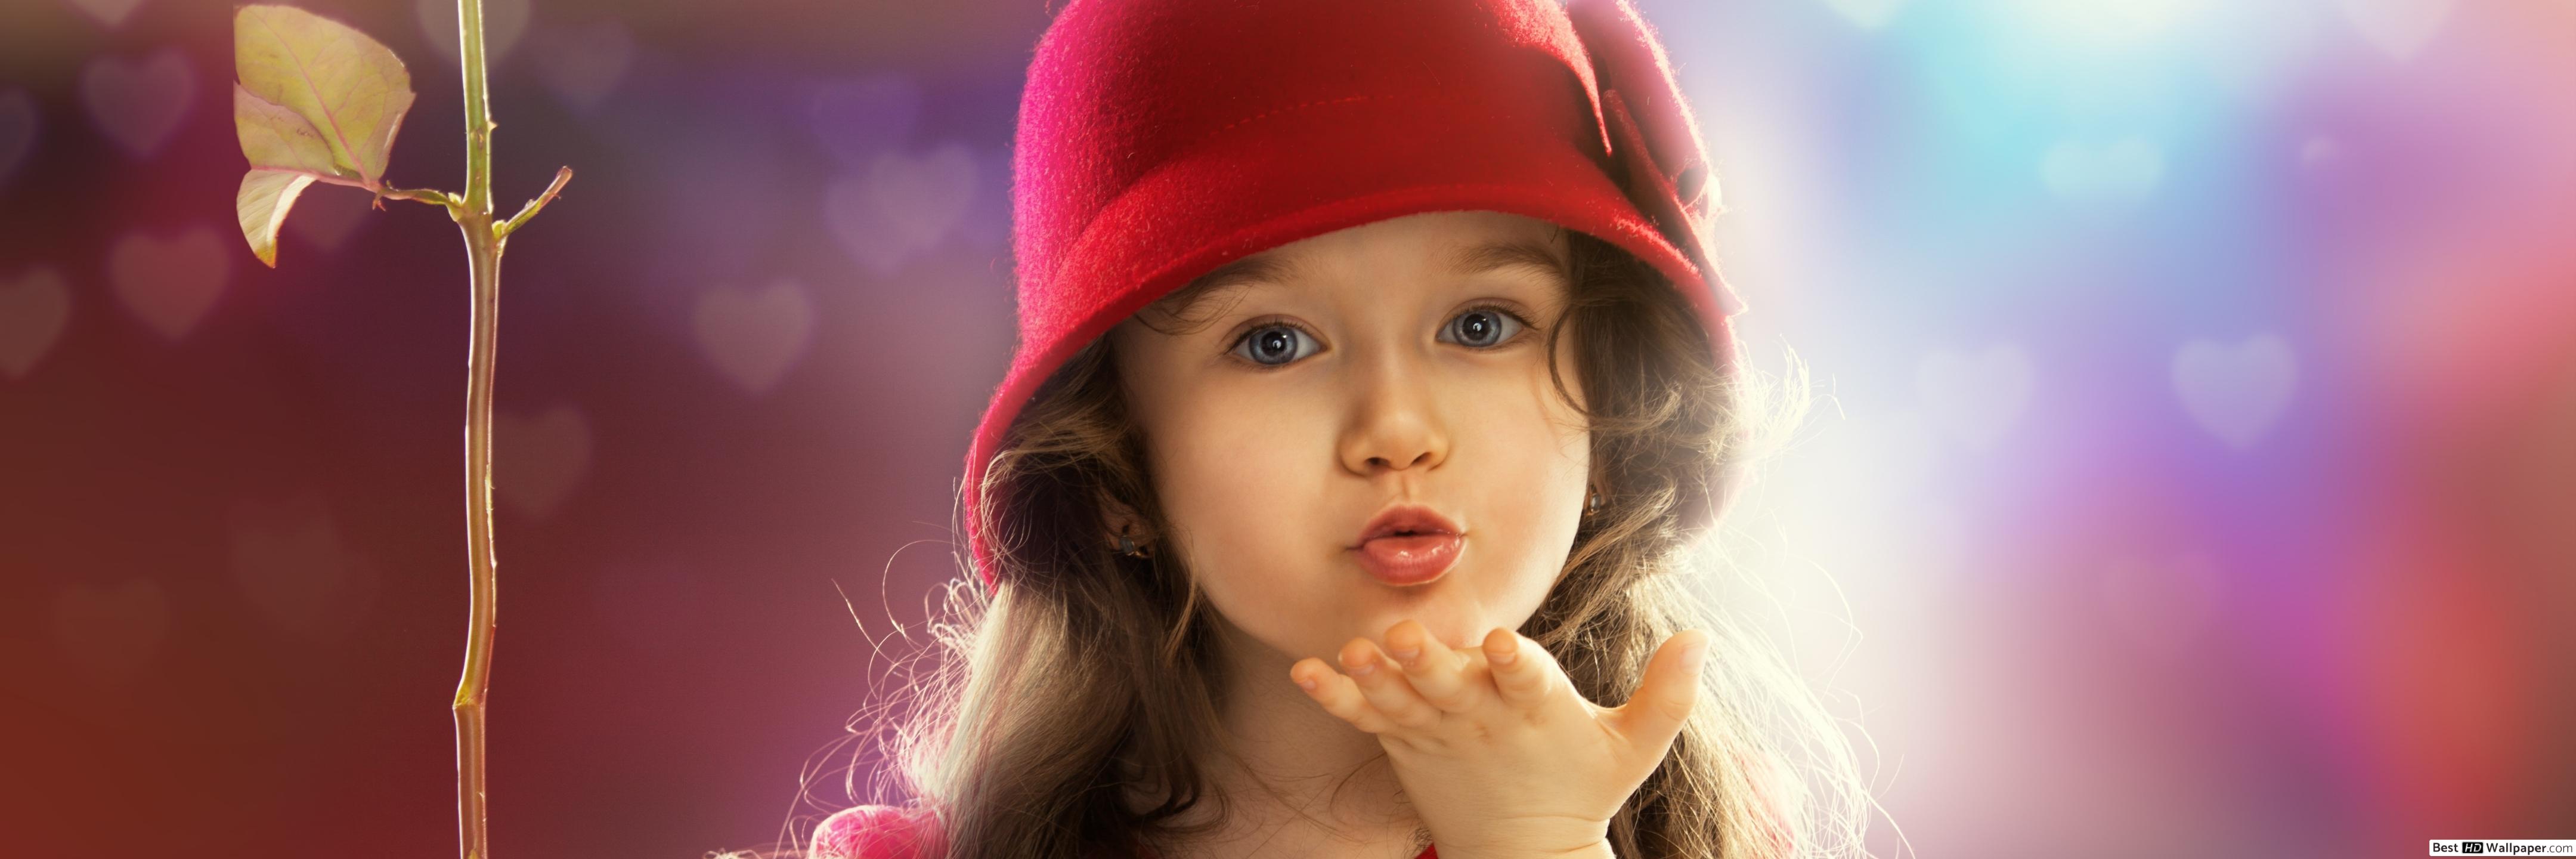 Sweet Baby Pictures Download - HD Wallpaper 